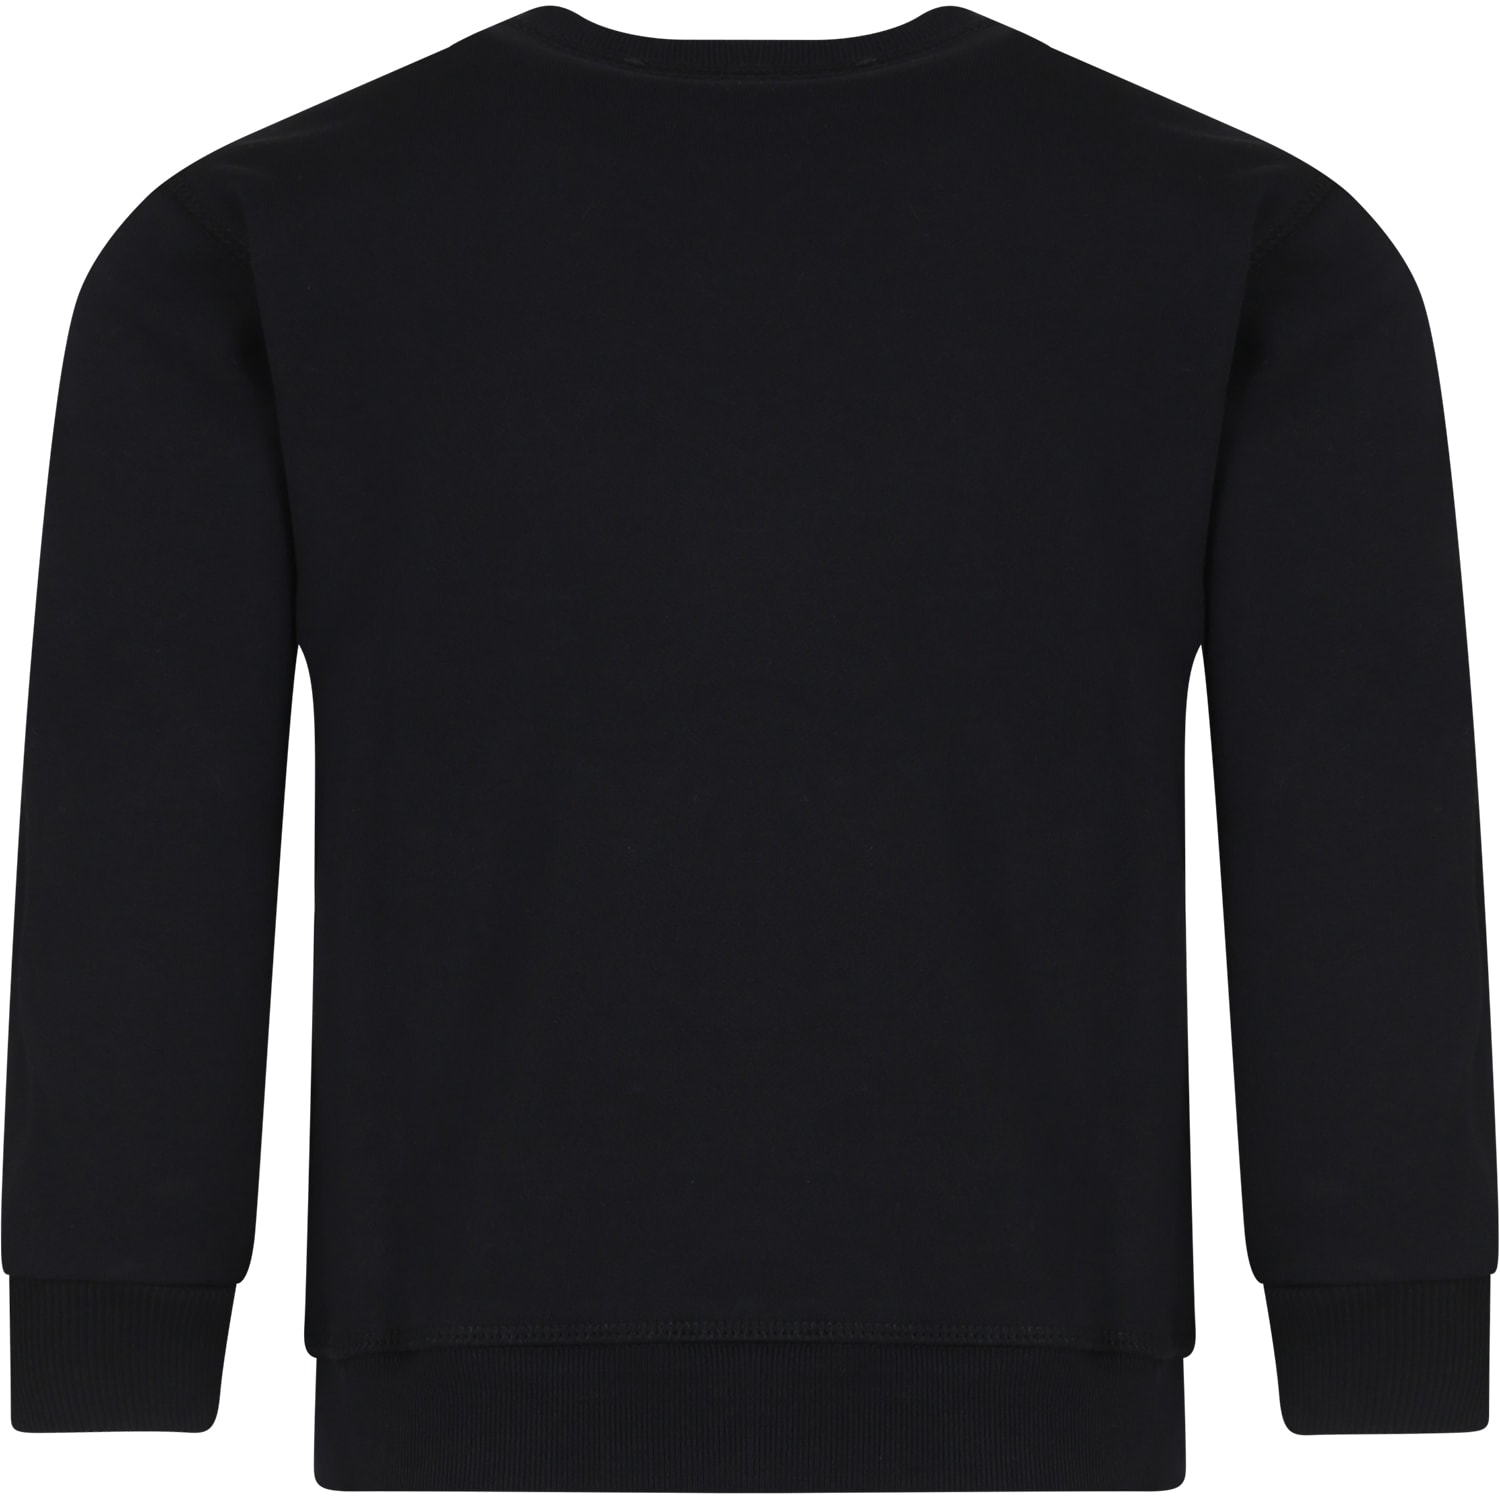 Shop Dsquared2 Black Sweatshirt For Boy With Logo And Print